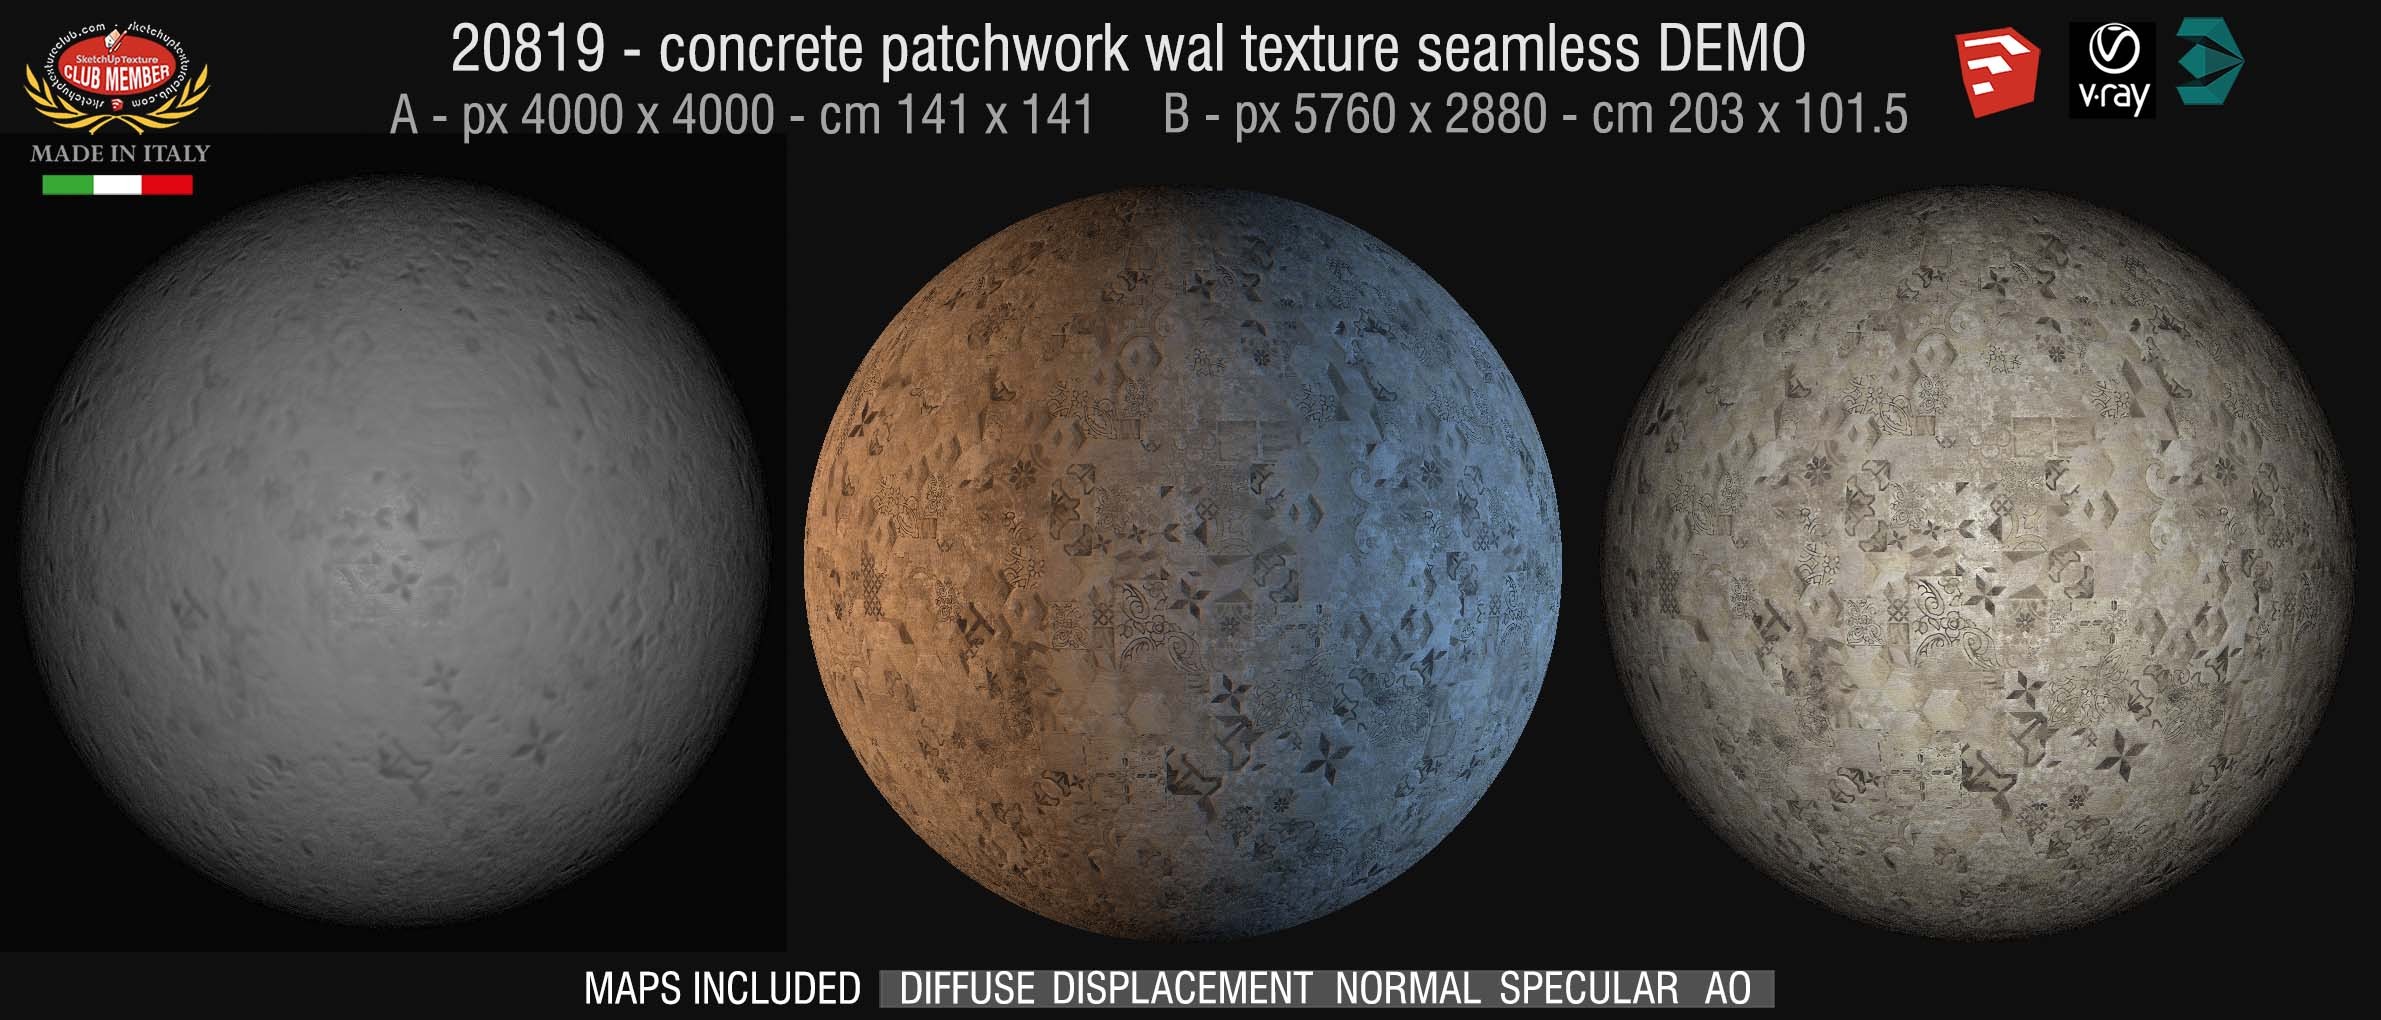 20819 Concrete patchwork wall texture seamless + maps DEMO